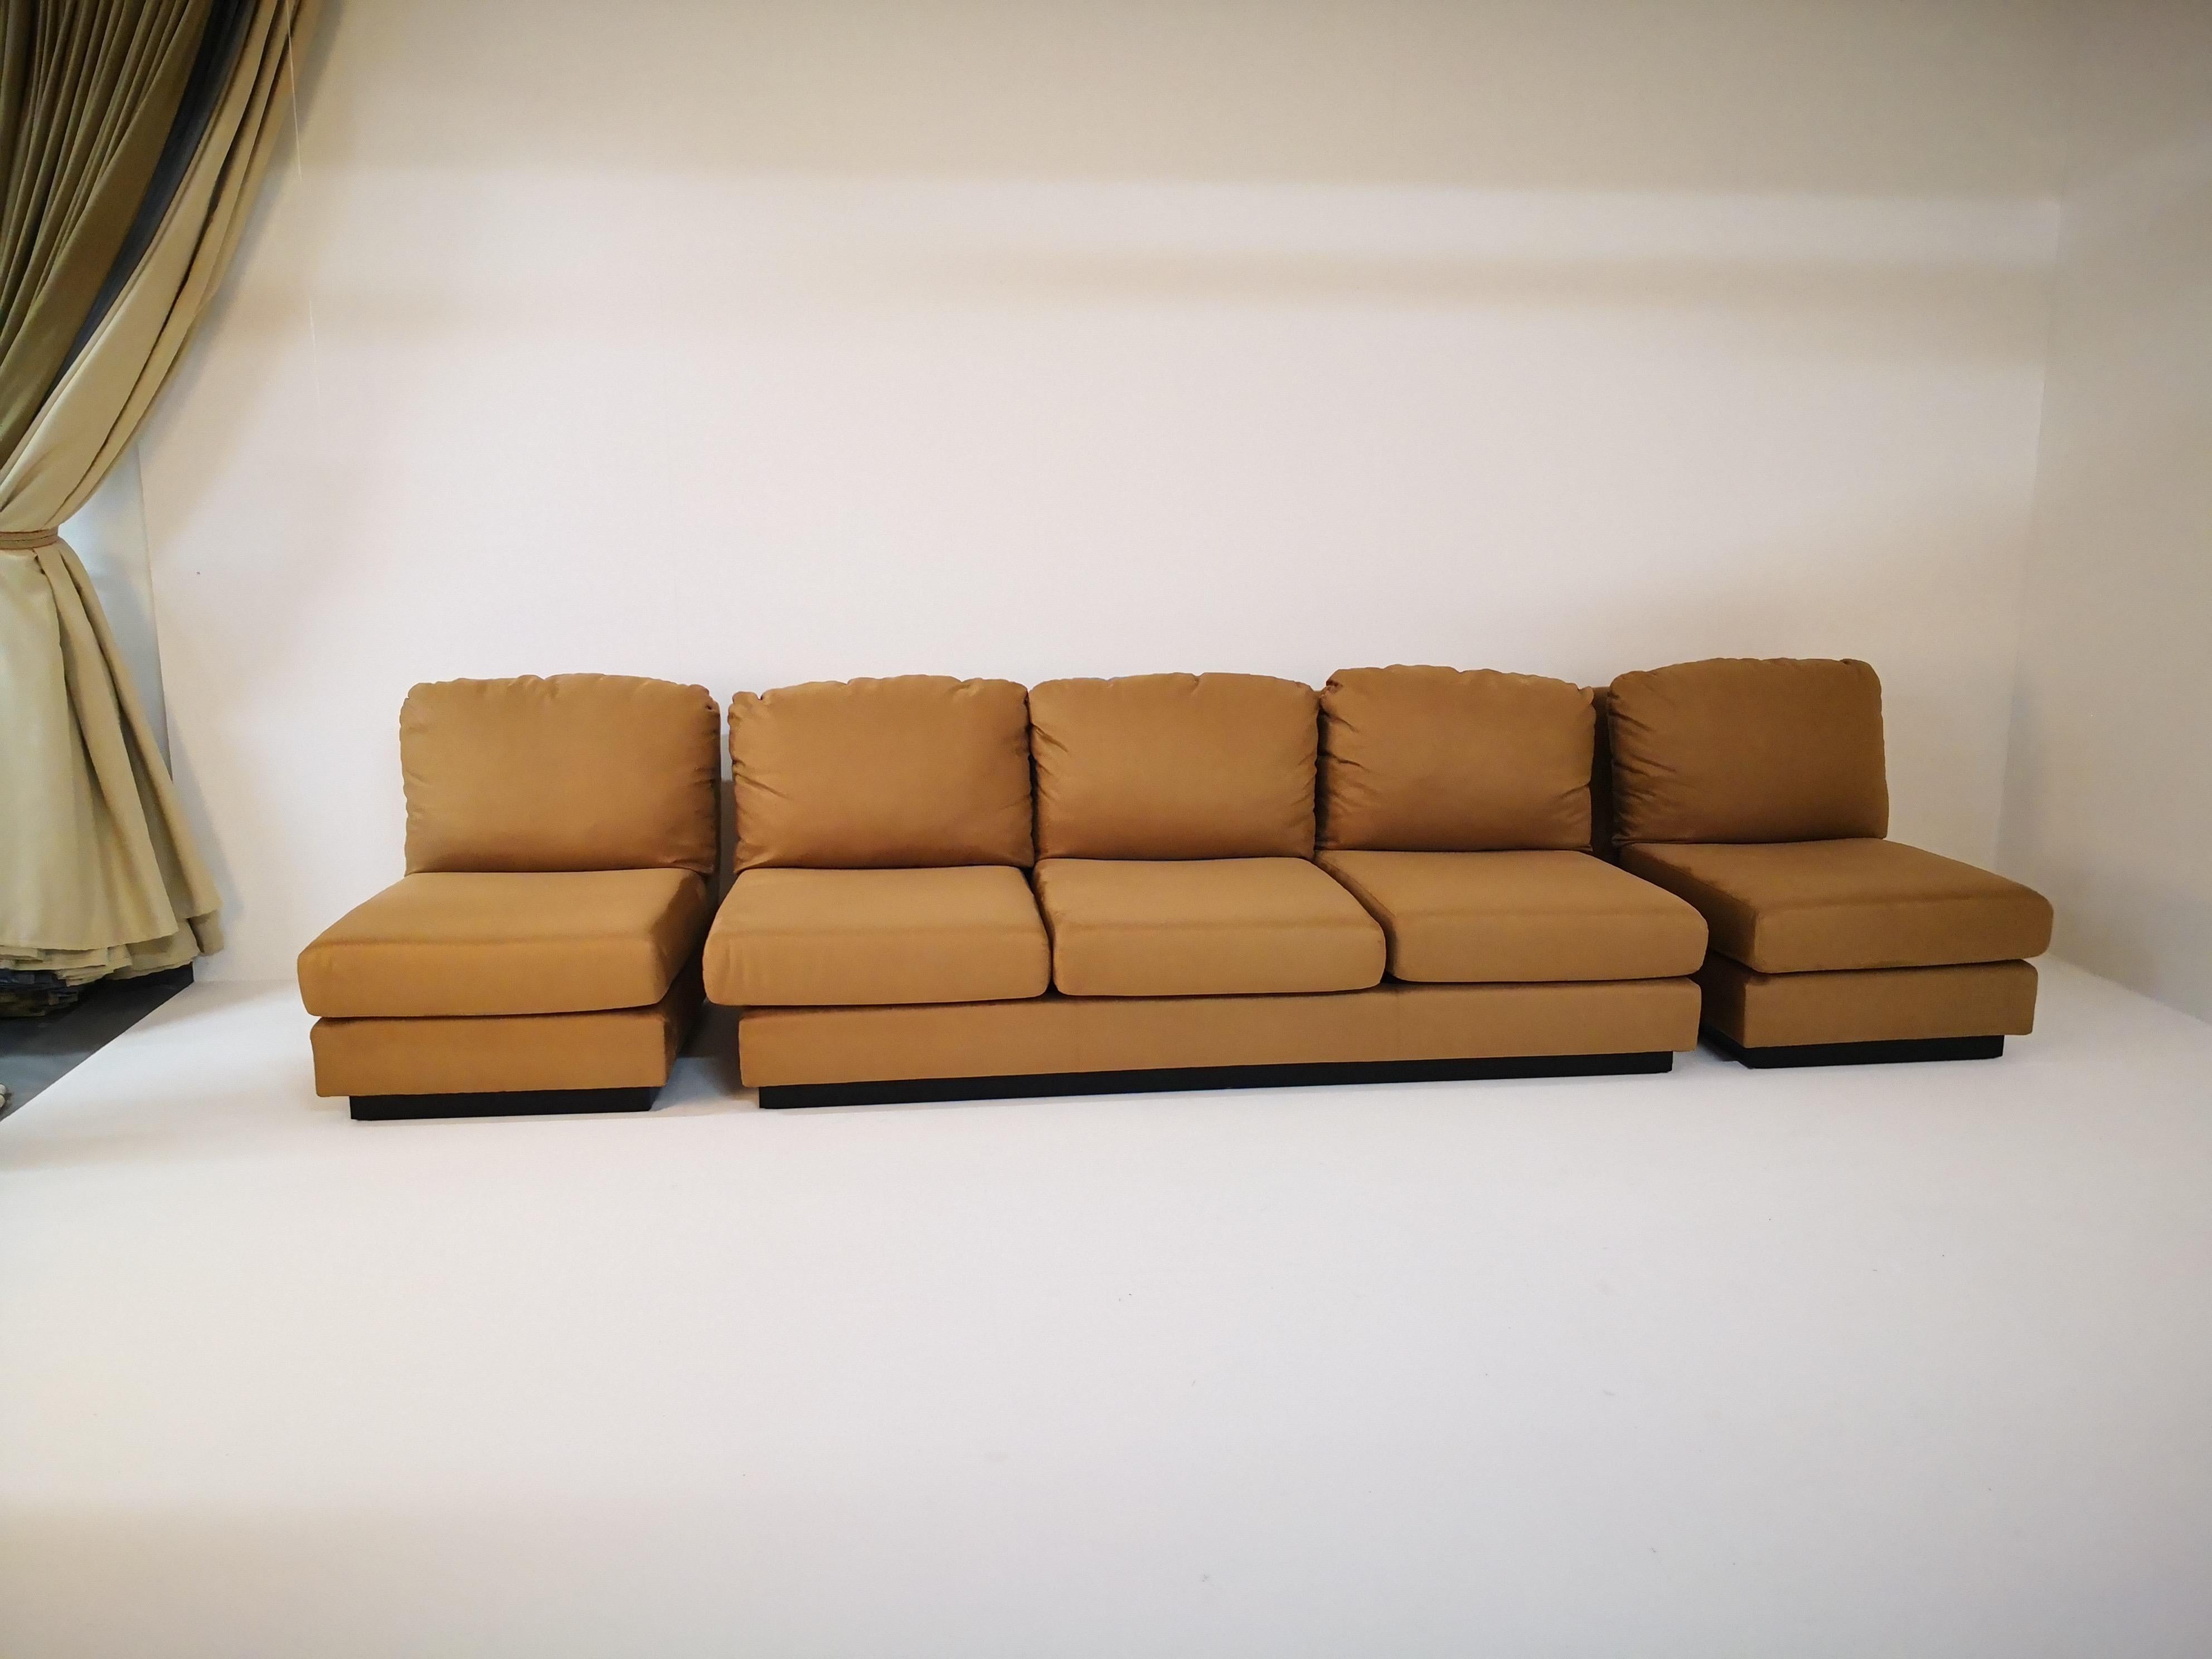 Extremely rare living set by Willy Rizzo finished in suede with wood laquer bases. The set consists in 1 sofa and 2 armchairs. This iconic design featured prominently in the prestigious Italian design periodical 'Casa Vogue' throughout the early to